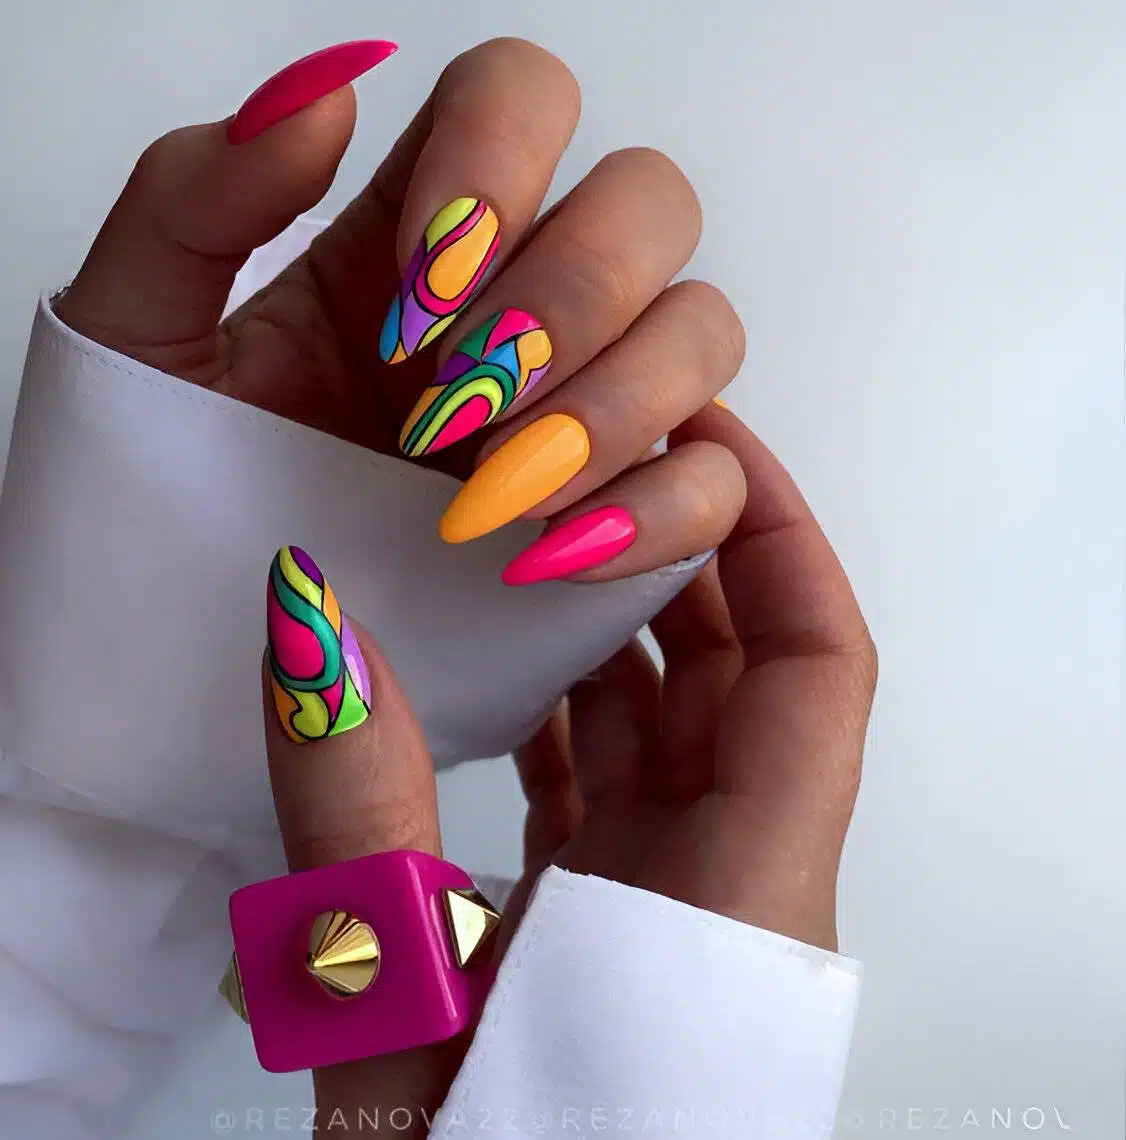 30 Colorful Nail Art Designs To Have Fun And Stay Fabulous - 231